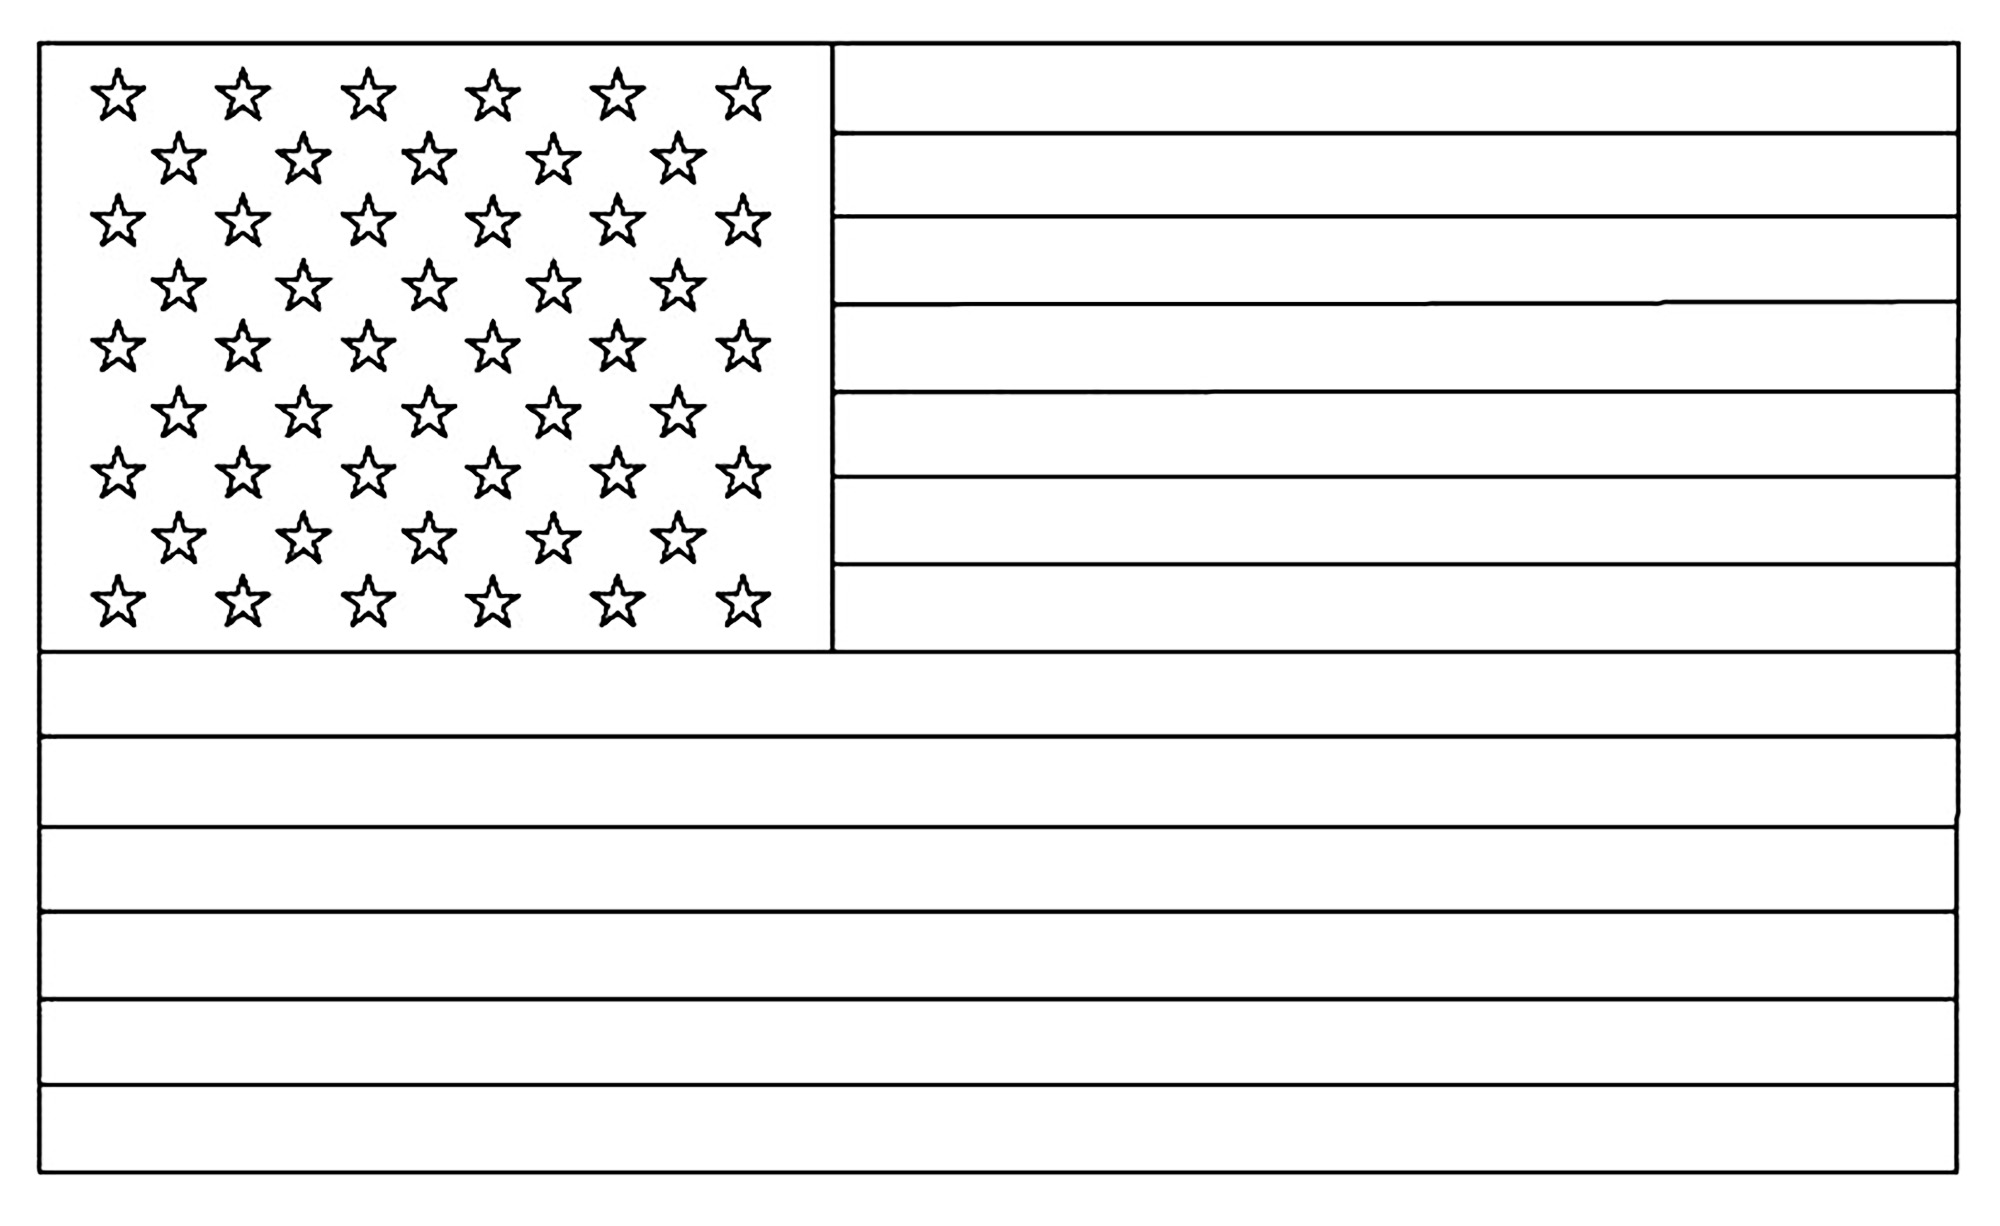 Free Flags coloring page to print and color